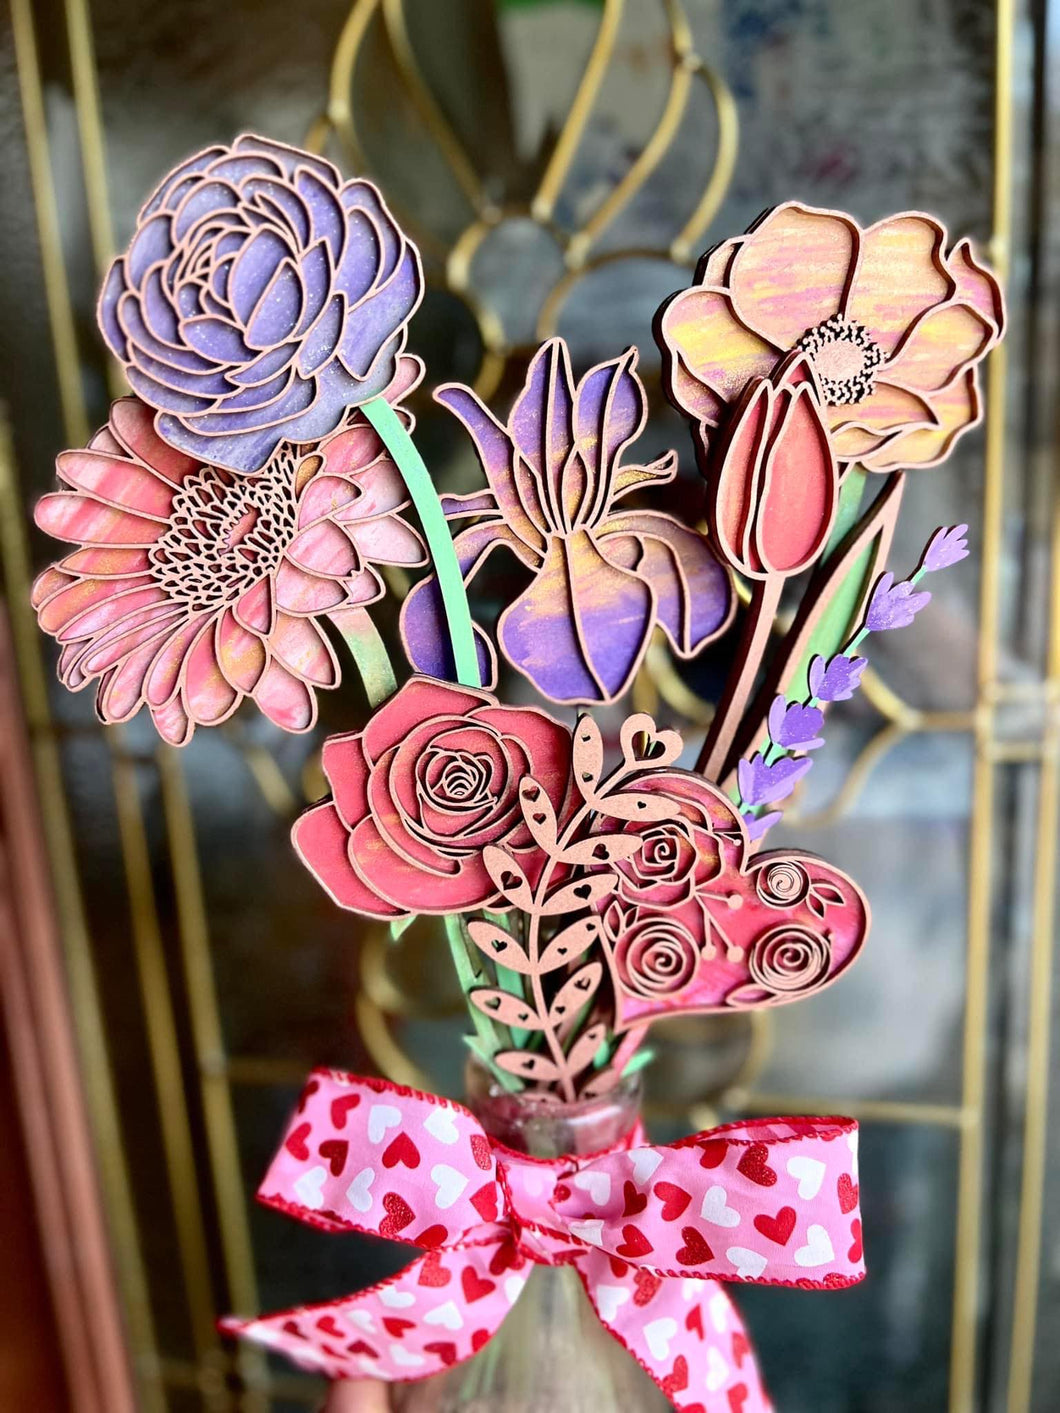 Wood Flower Bouquet Class - Friday, May 5th 6-8p.m.